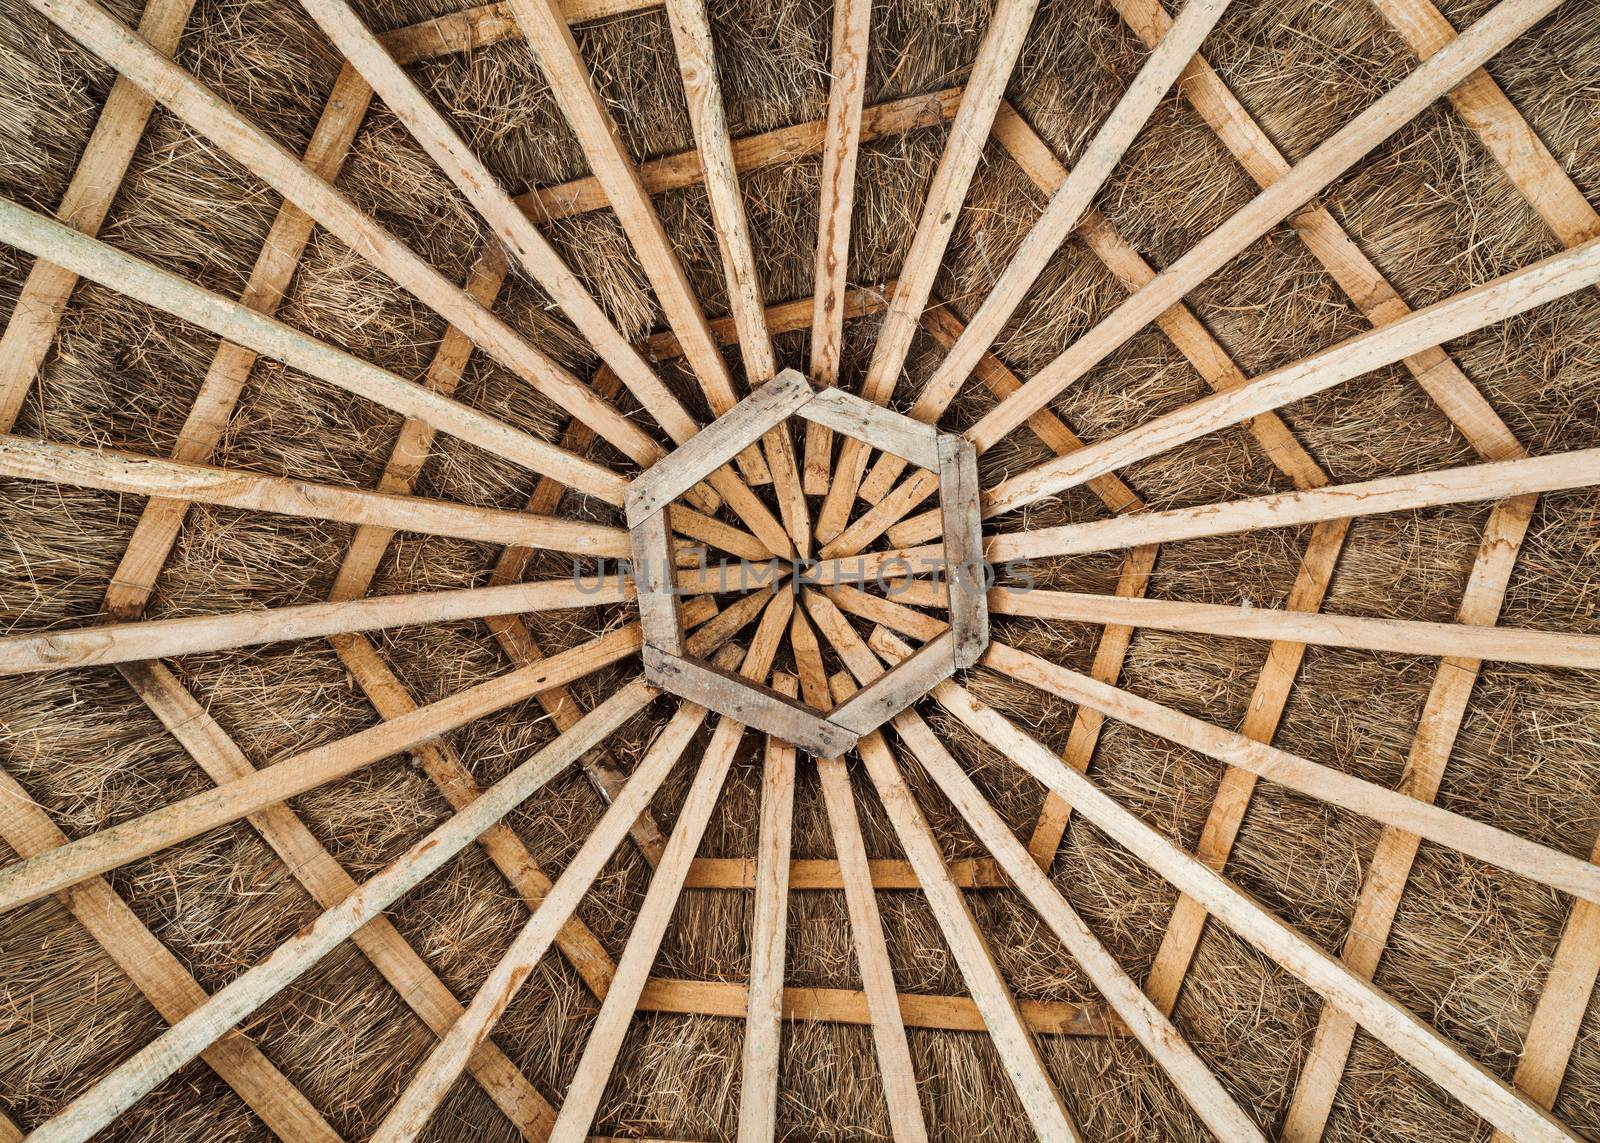 Wood frame and thatched roof by dutourdumonde